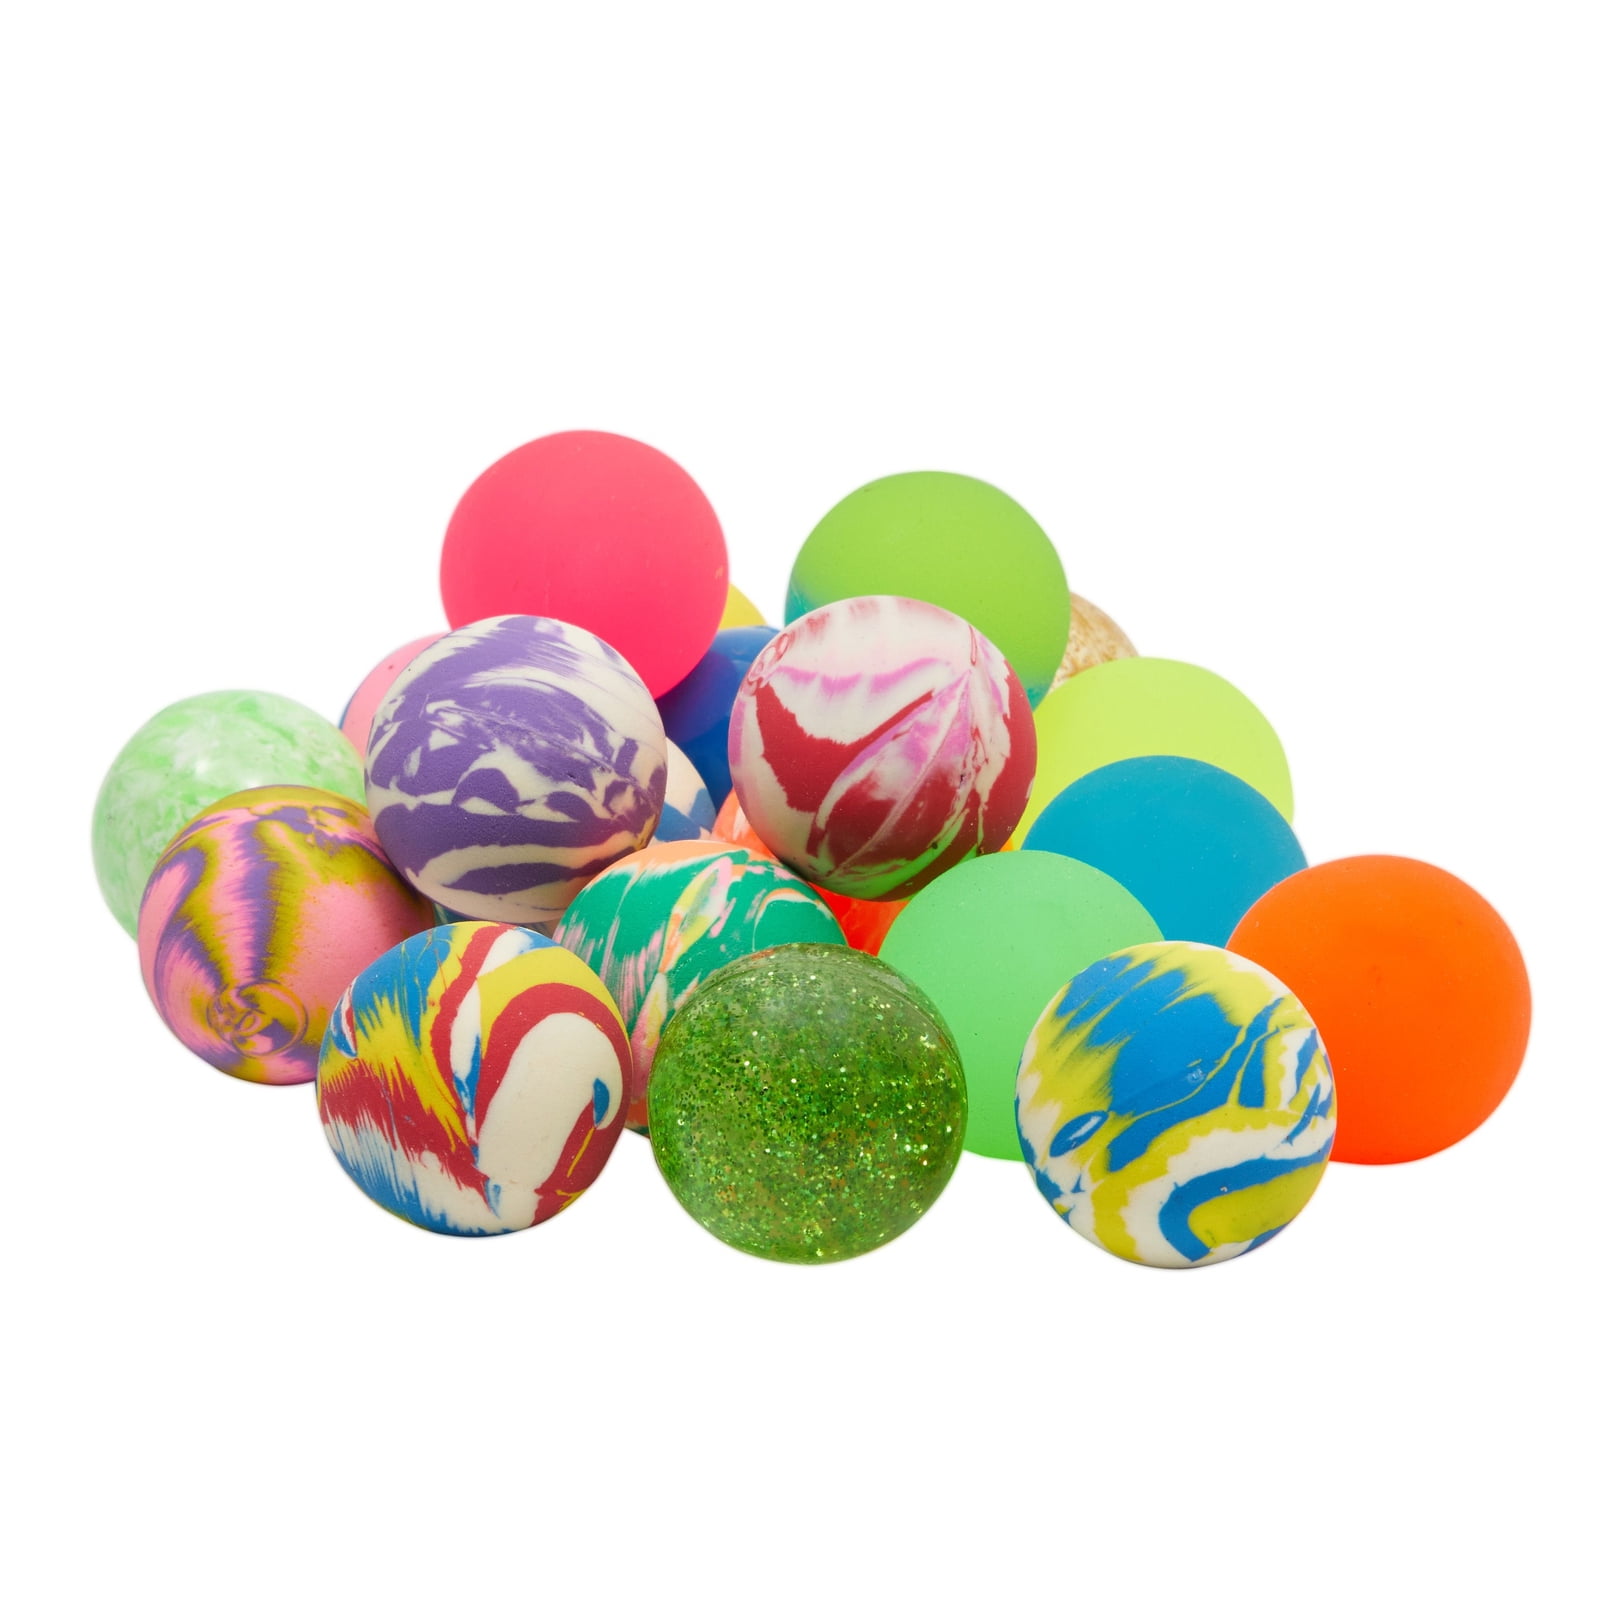 144 Super High Bounce Balls Hi Bouncy Rubber Ball Superball Party Favors Cat Toy for sale online 